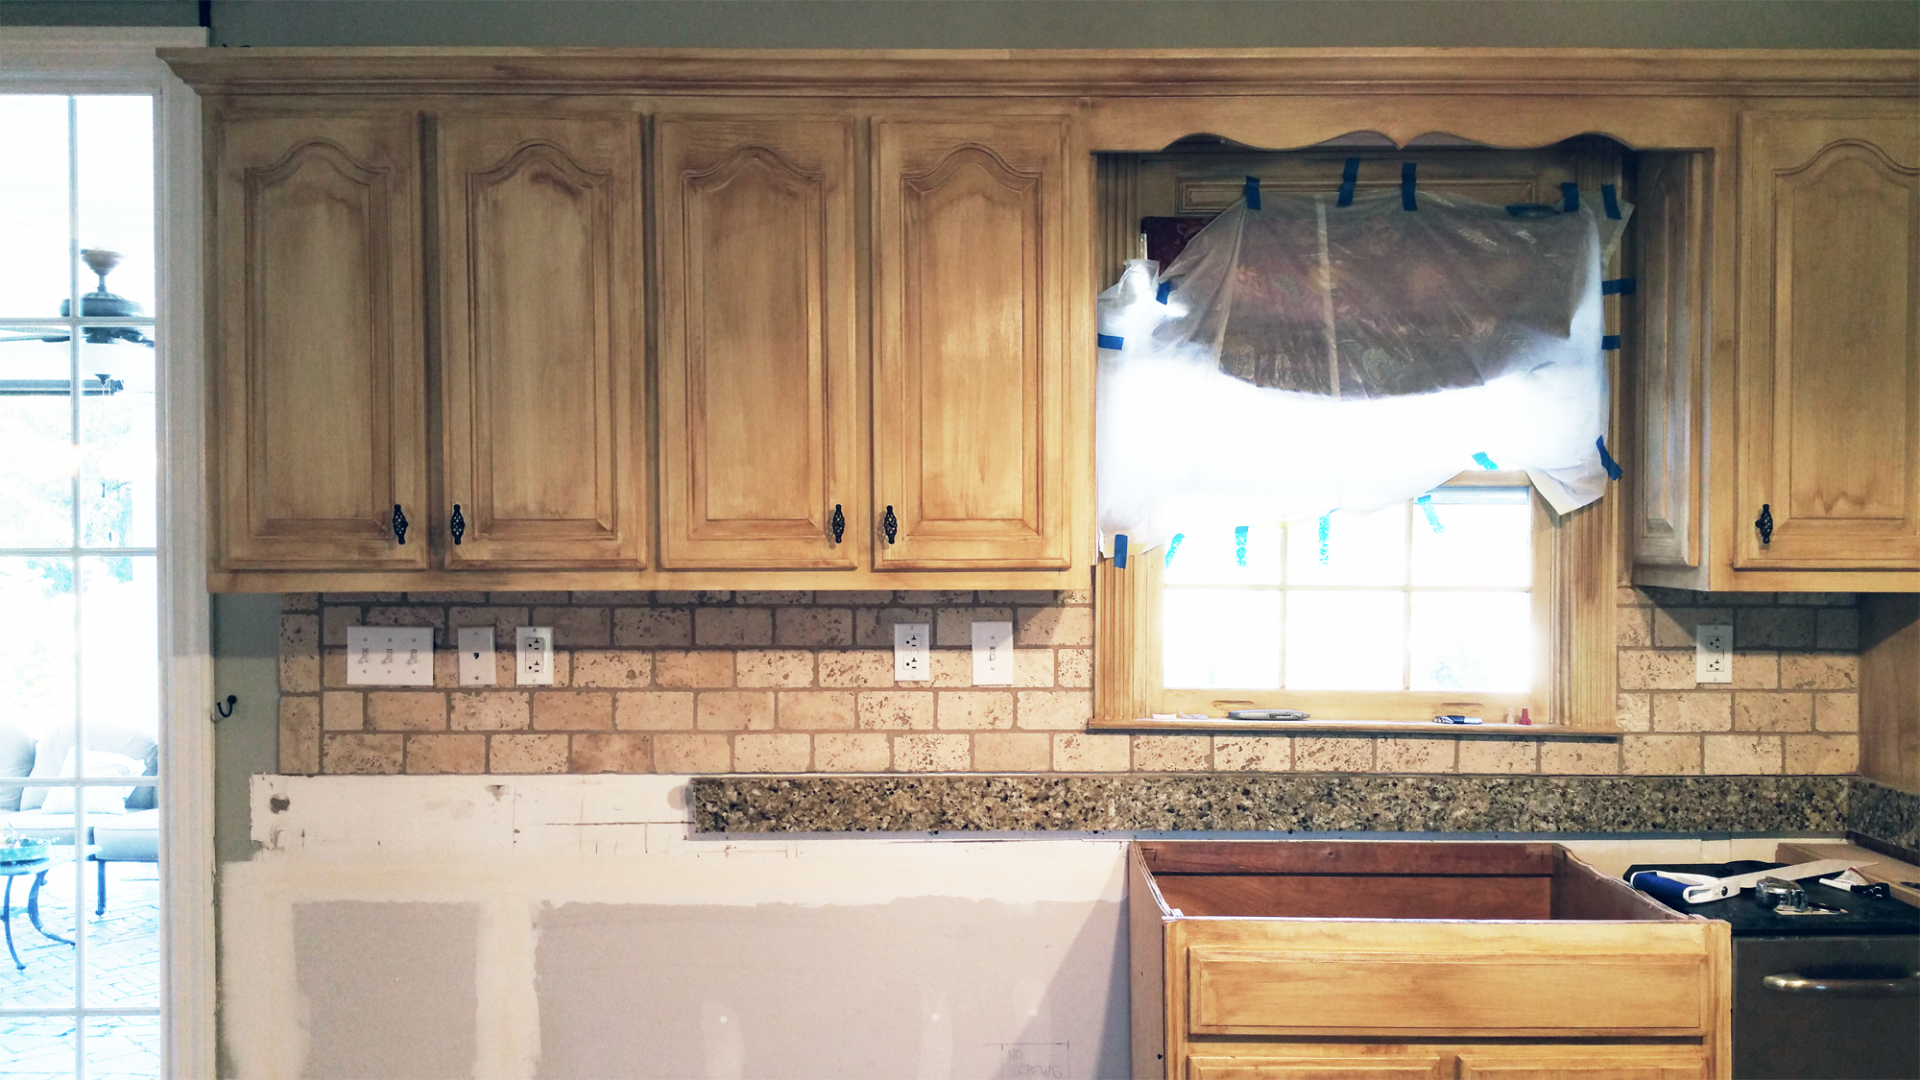 View this Mount Juliet customer’s kitchen cabinets before transformation adding a warm modern Tuscan glaze look.